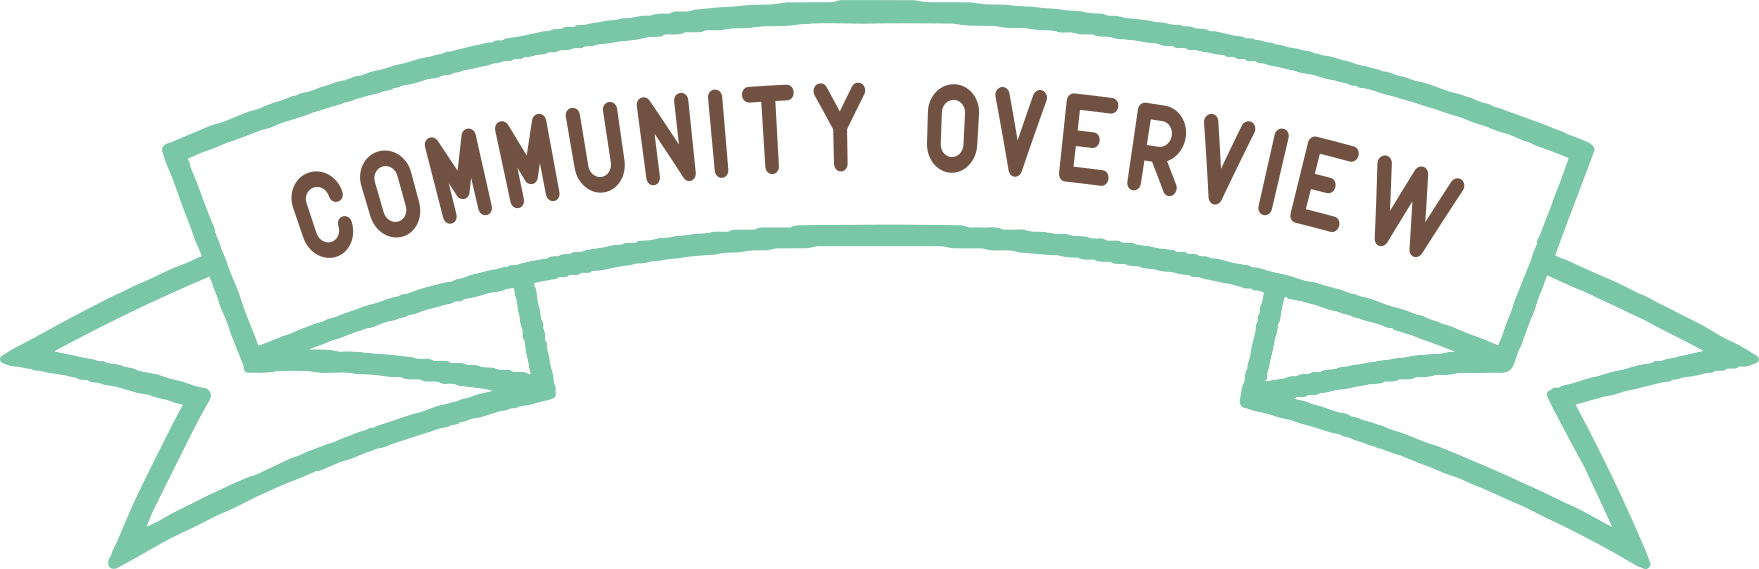 Community Overview Banner